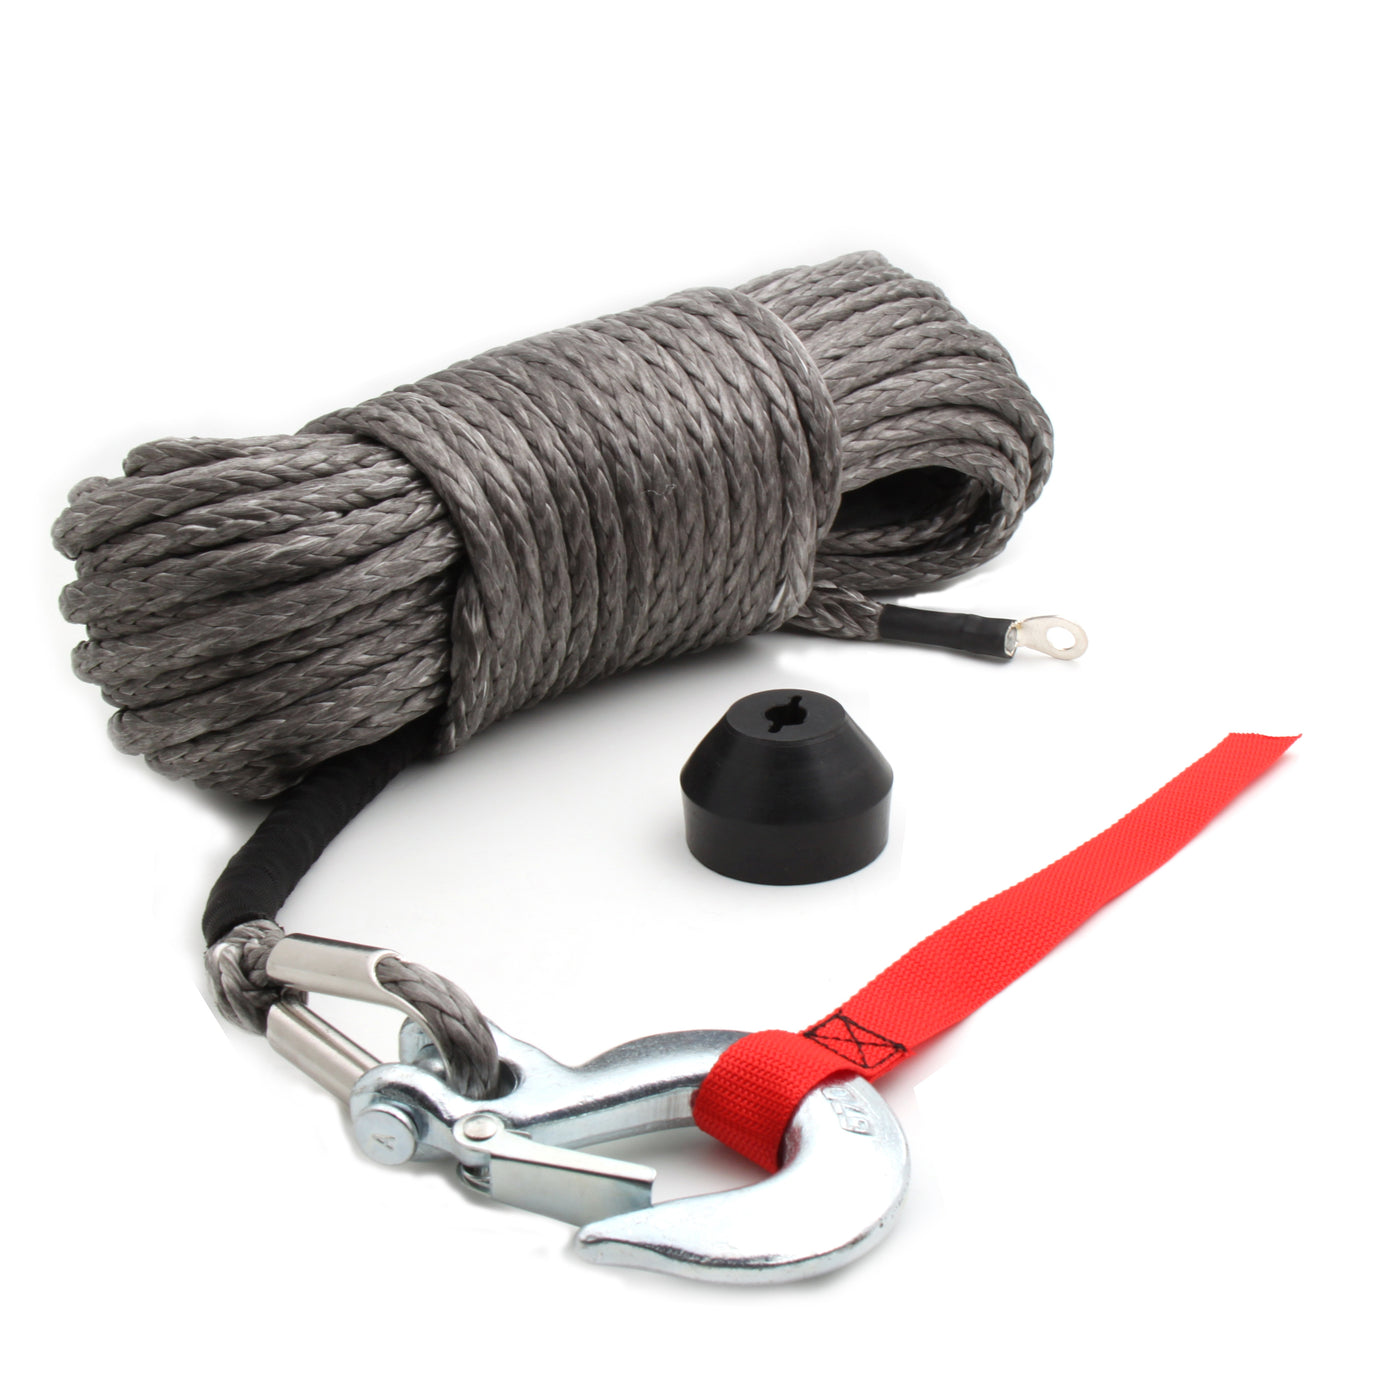 Synthetic Winch Rope Kit w/ Snap Hook and Rubber Stopper